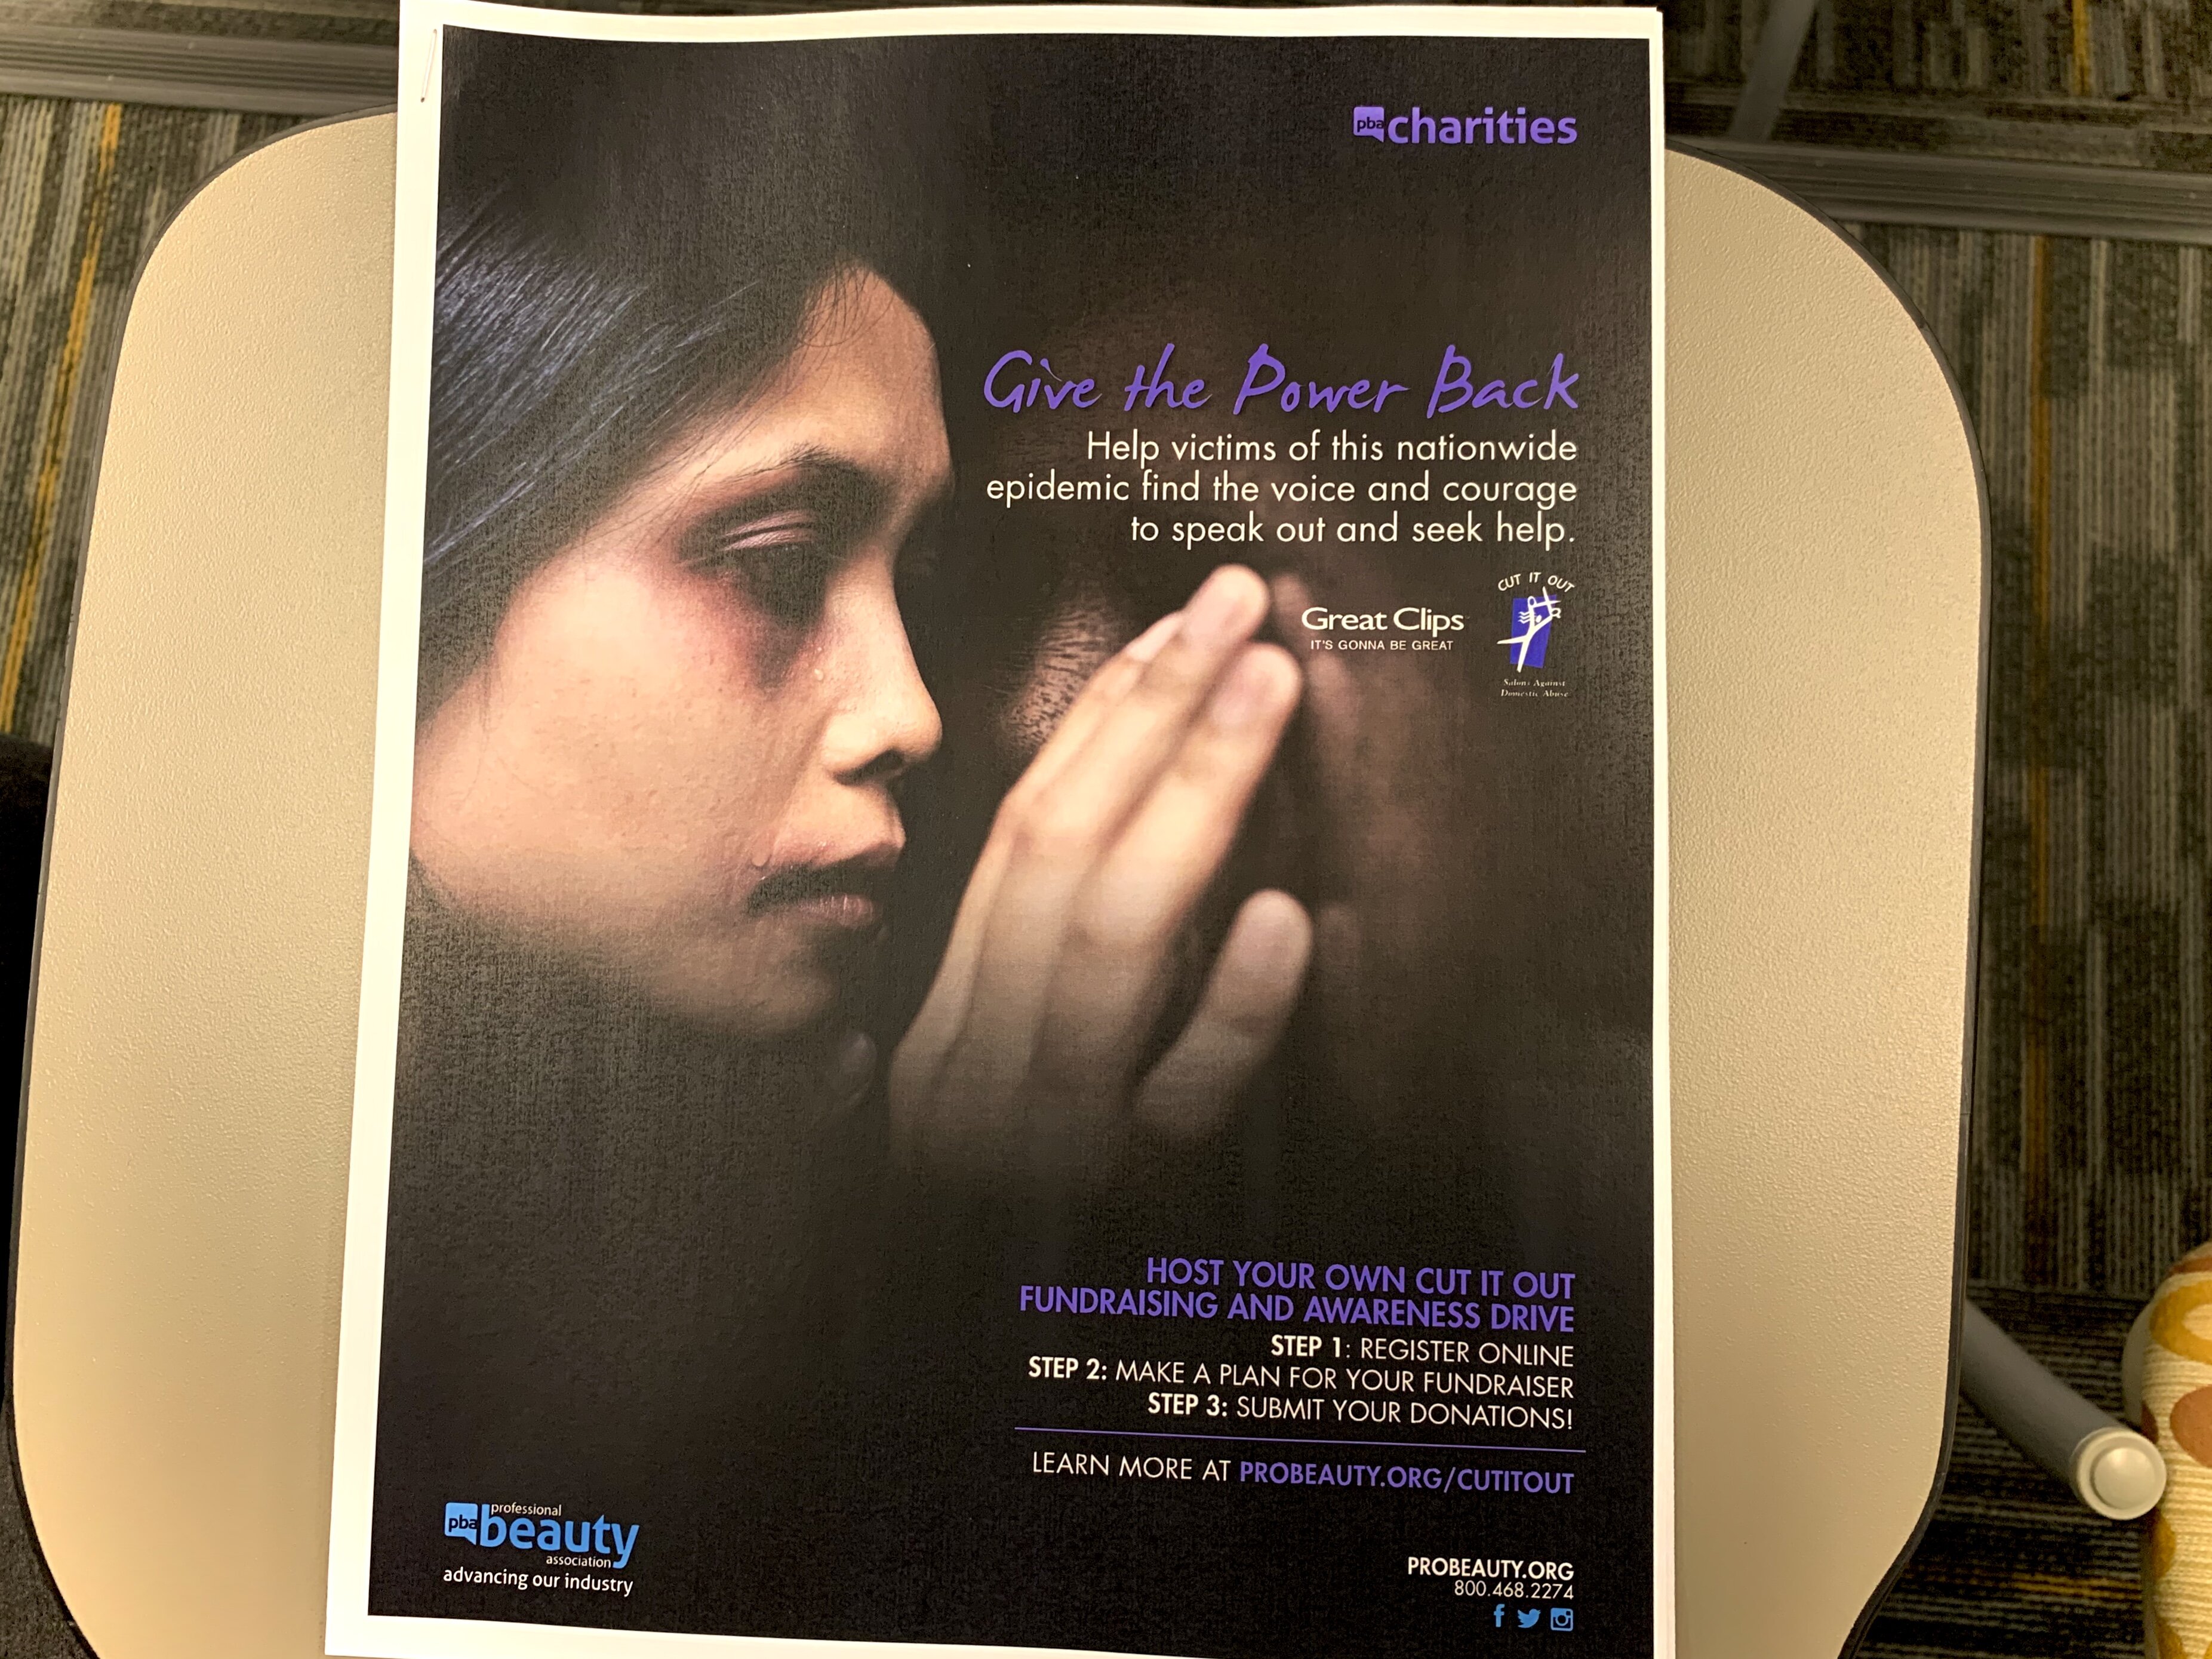 The Shelby County Crime Victims and Rape Crisis Center is using training materials from the national CUT IT OUT program to train Mid-South beauty industry professionals to identify signs of domestic violence among clients. (Memphis CUT IT OUT).